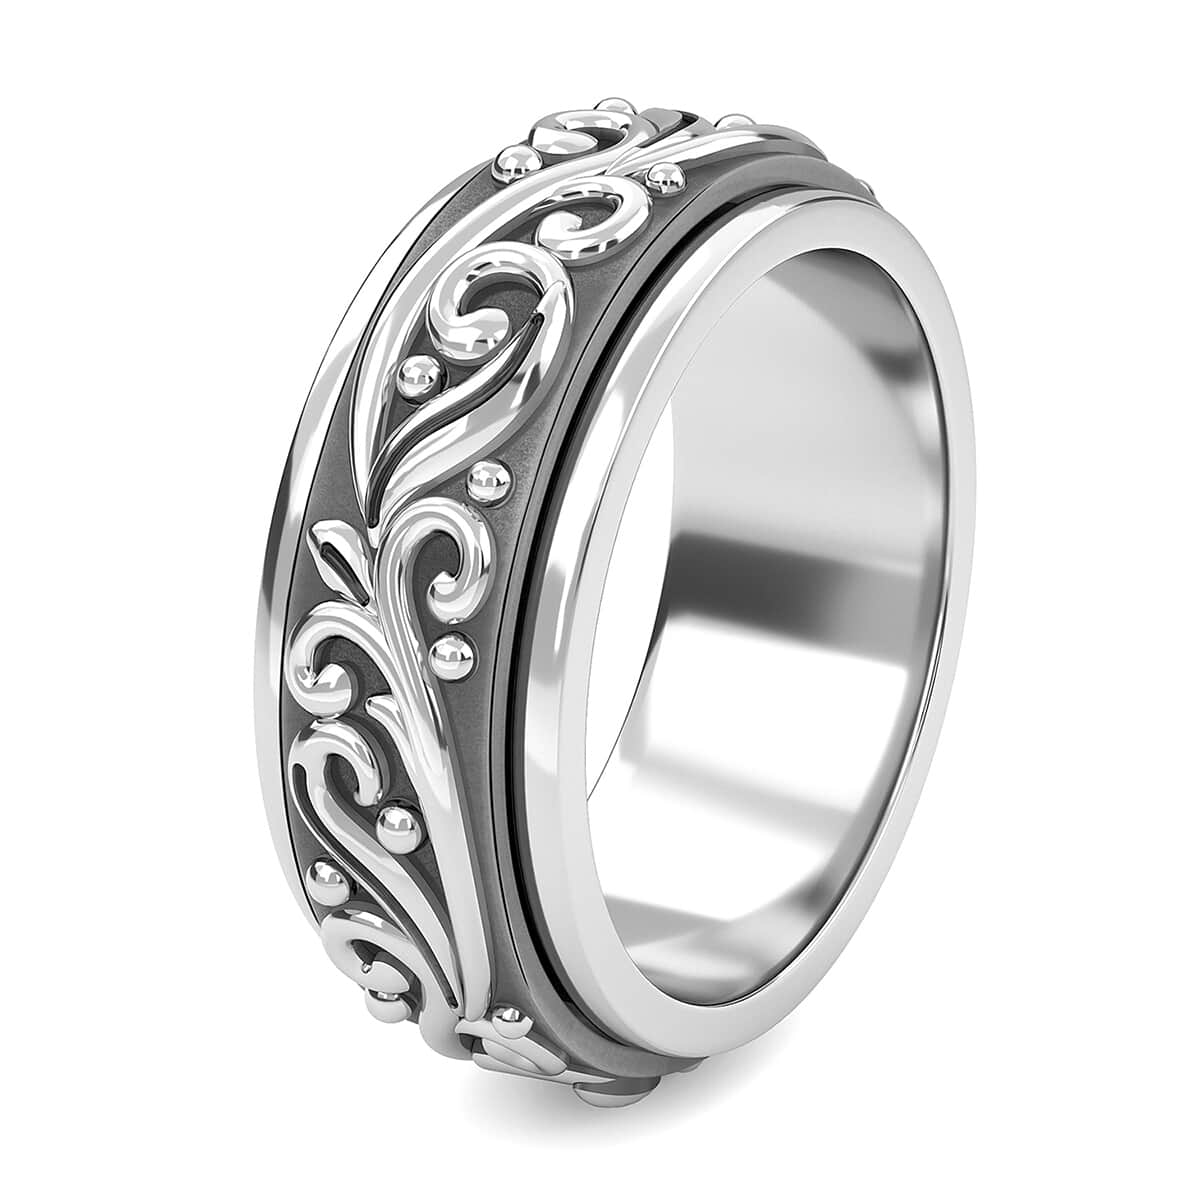 Sterling Silver Spinner Band Ring, Anxiety Ring for Women, 925 Sterling Silver Spinner Ring, Fidget Rings for Anxiety for Women, Stress Relieving Anxiety Ring, Promise Rings (Size 8.0) (7.65 g) image number 6